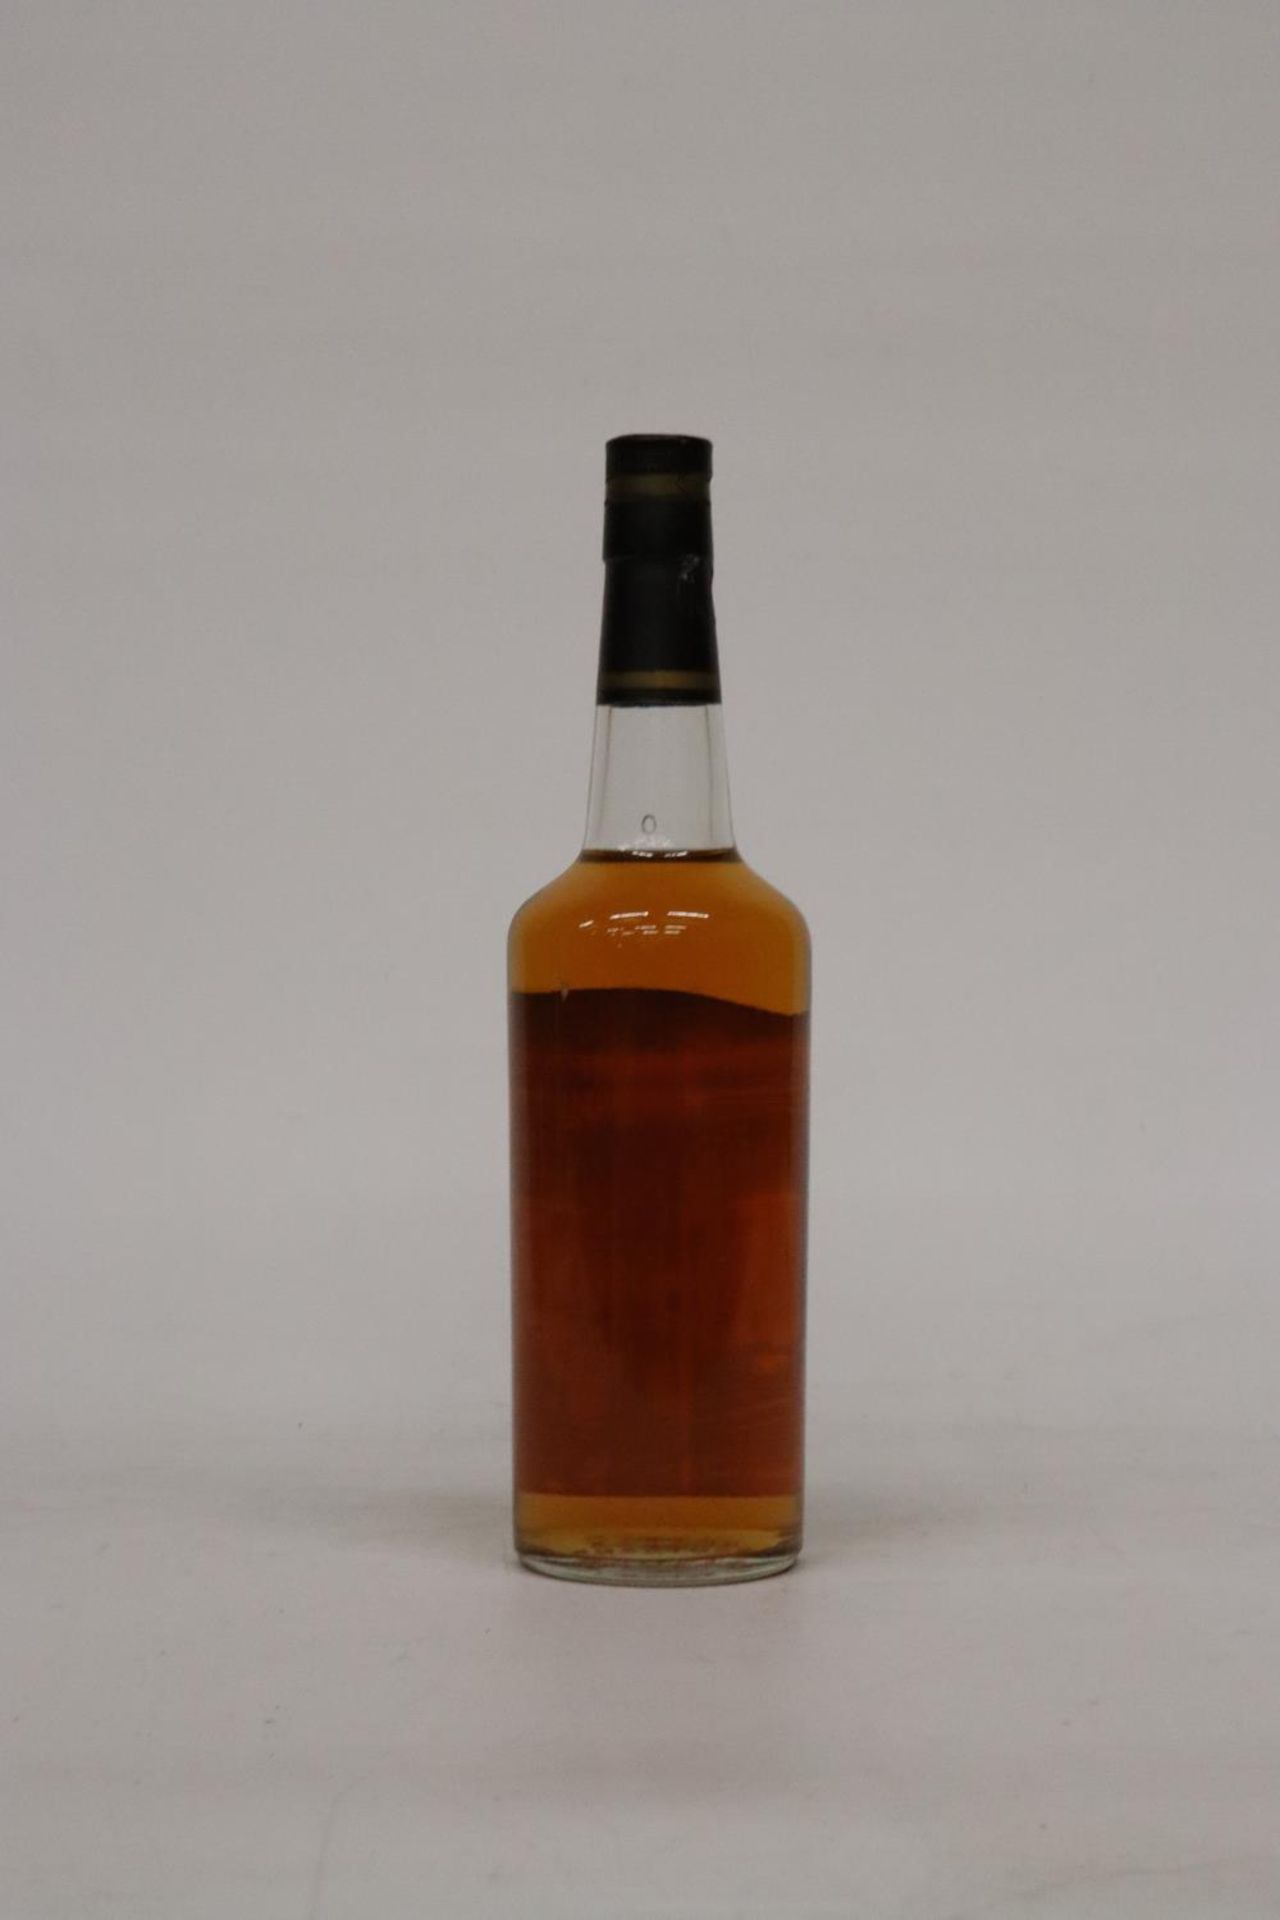 A 75.7CL HEPBURN AND ROSS 70 PROOF SCOTCH WHISKY - Image 2 of 3